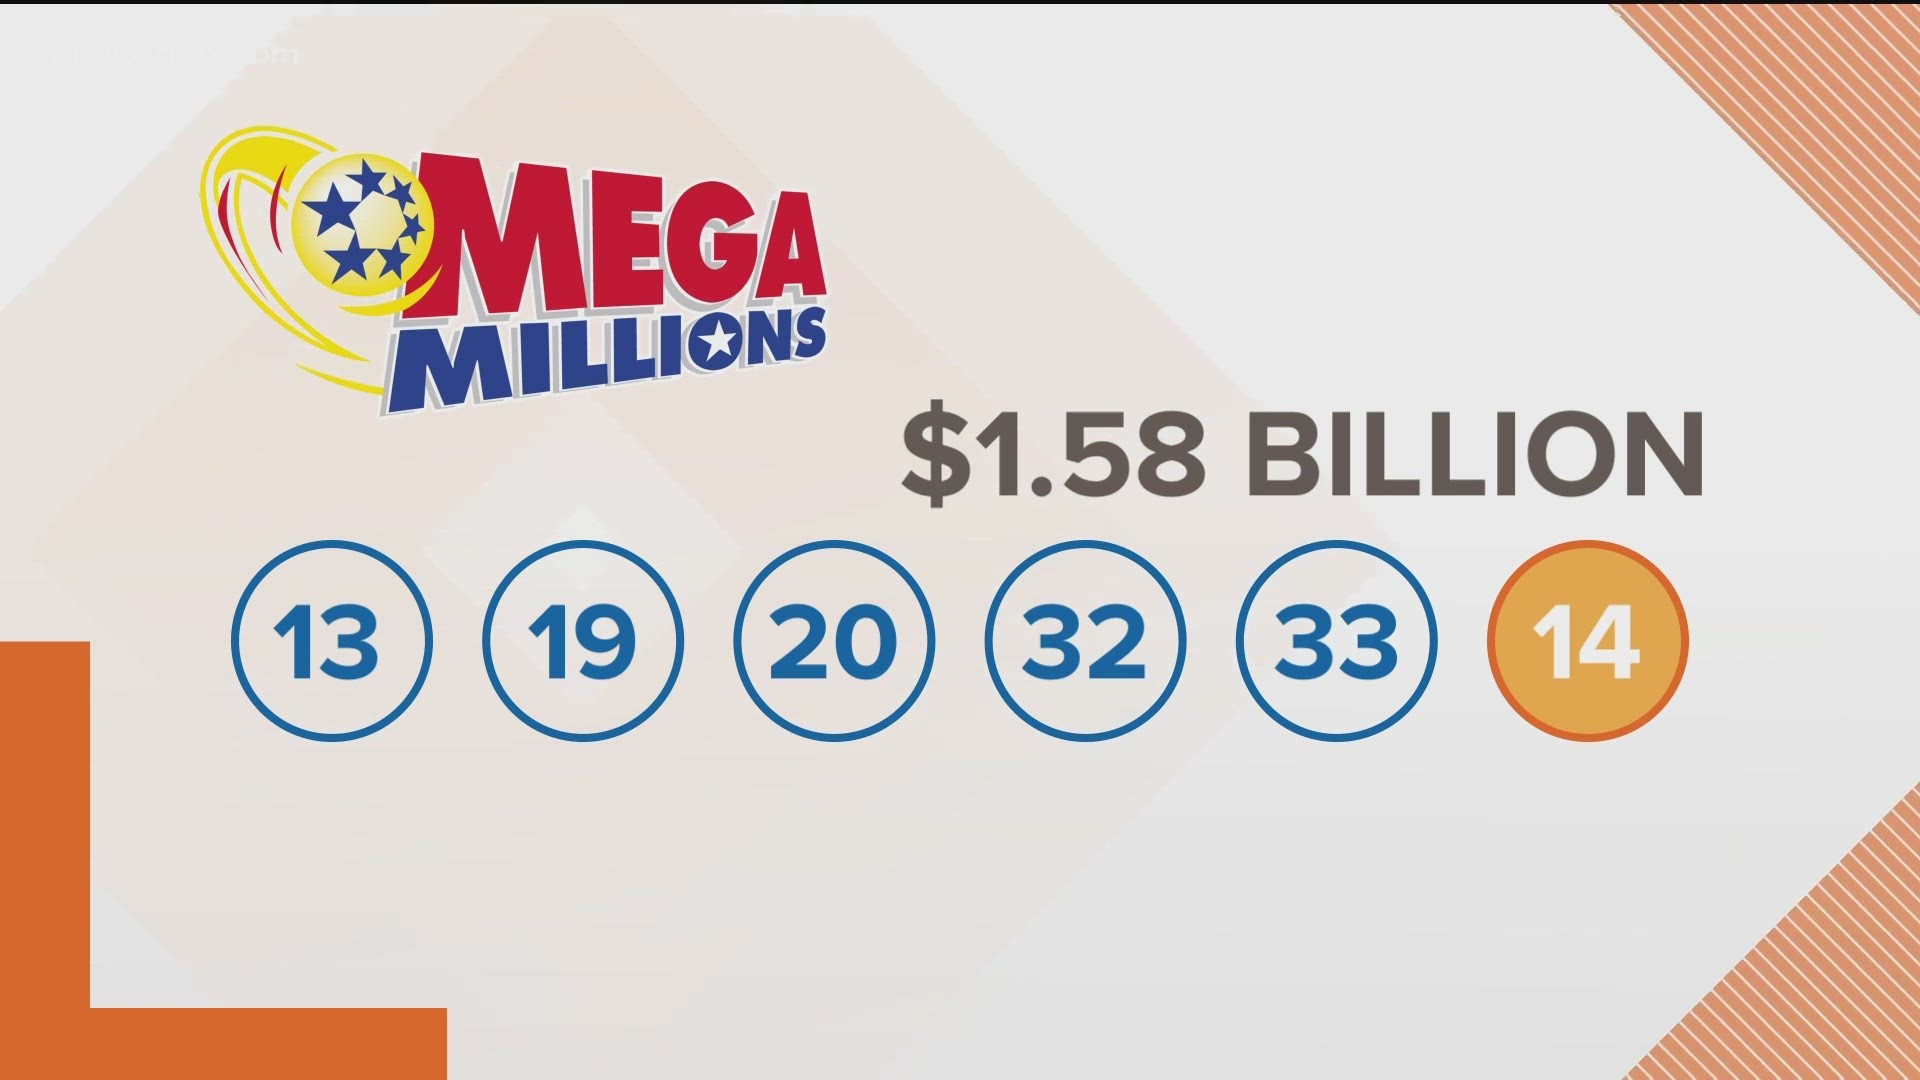 It's the largest lottery jackpot in Mega Millions history and ends a winless streak that has lasted since April.